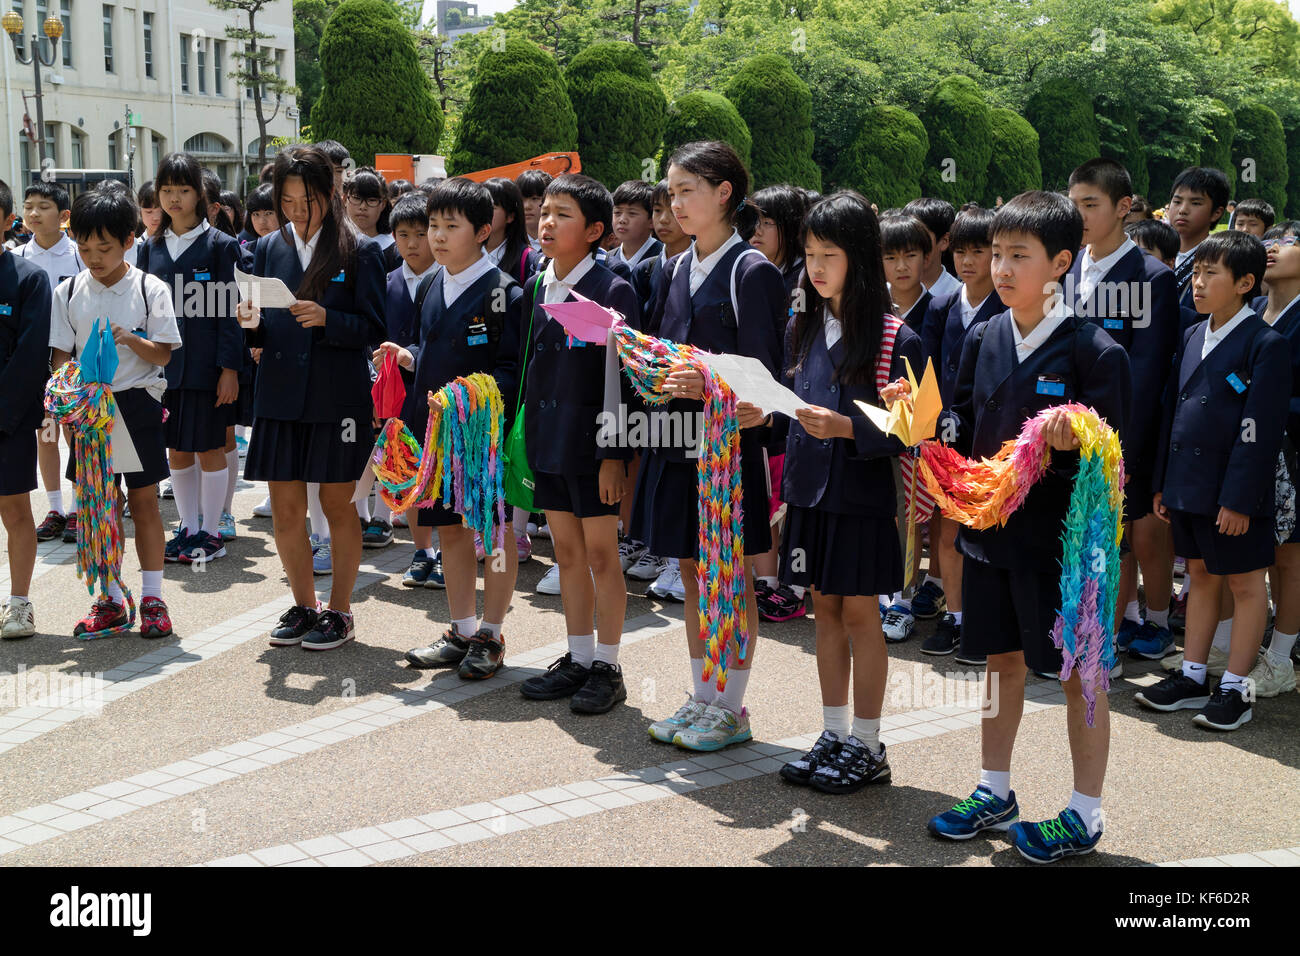 Hiroshima, Japan - May 25, 2017: Students gathering at the Children's Peace Monument to offer thousands colorful origami cranes in memory of atomic bo Stock Photo